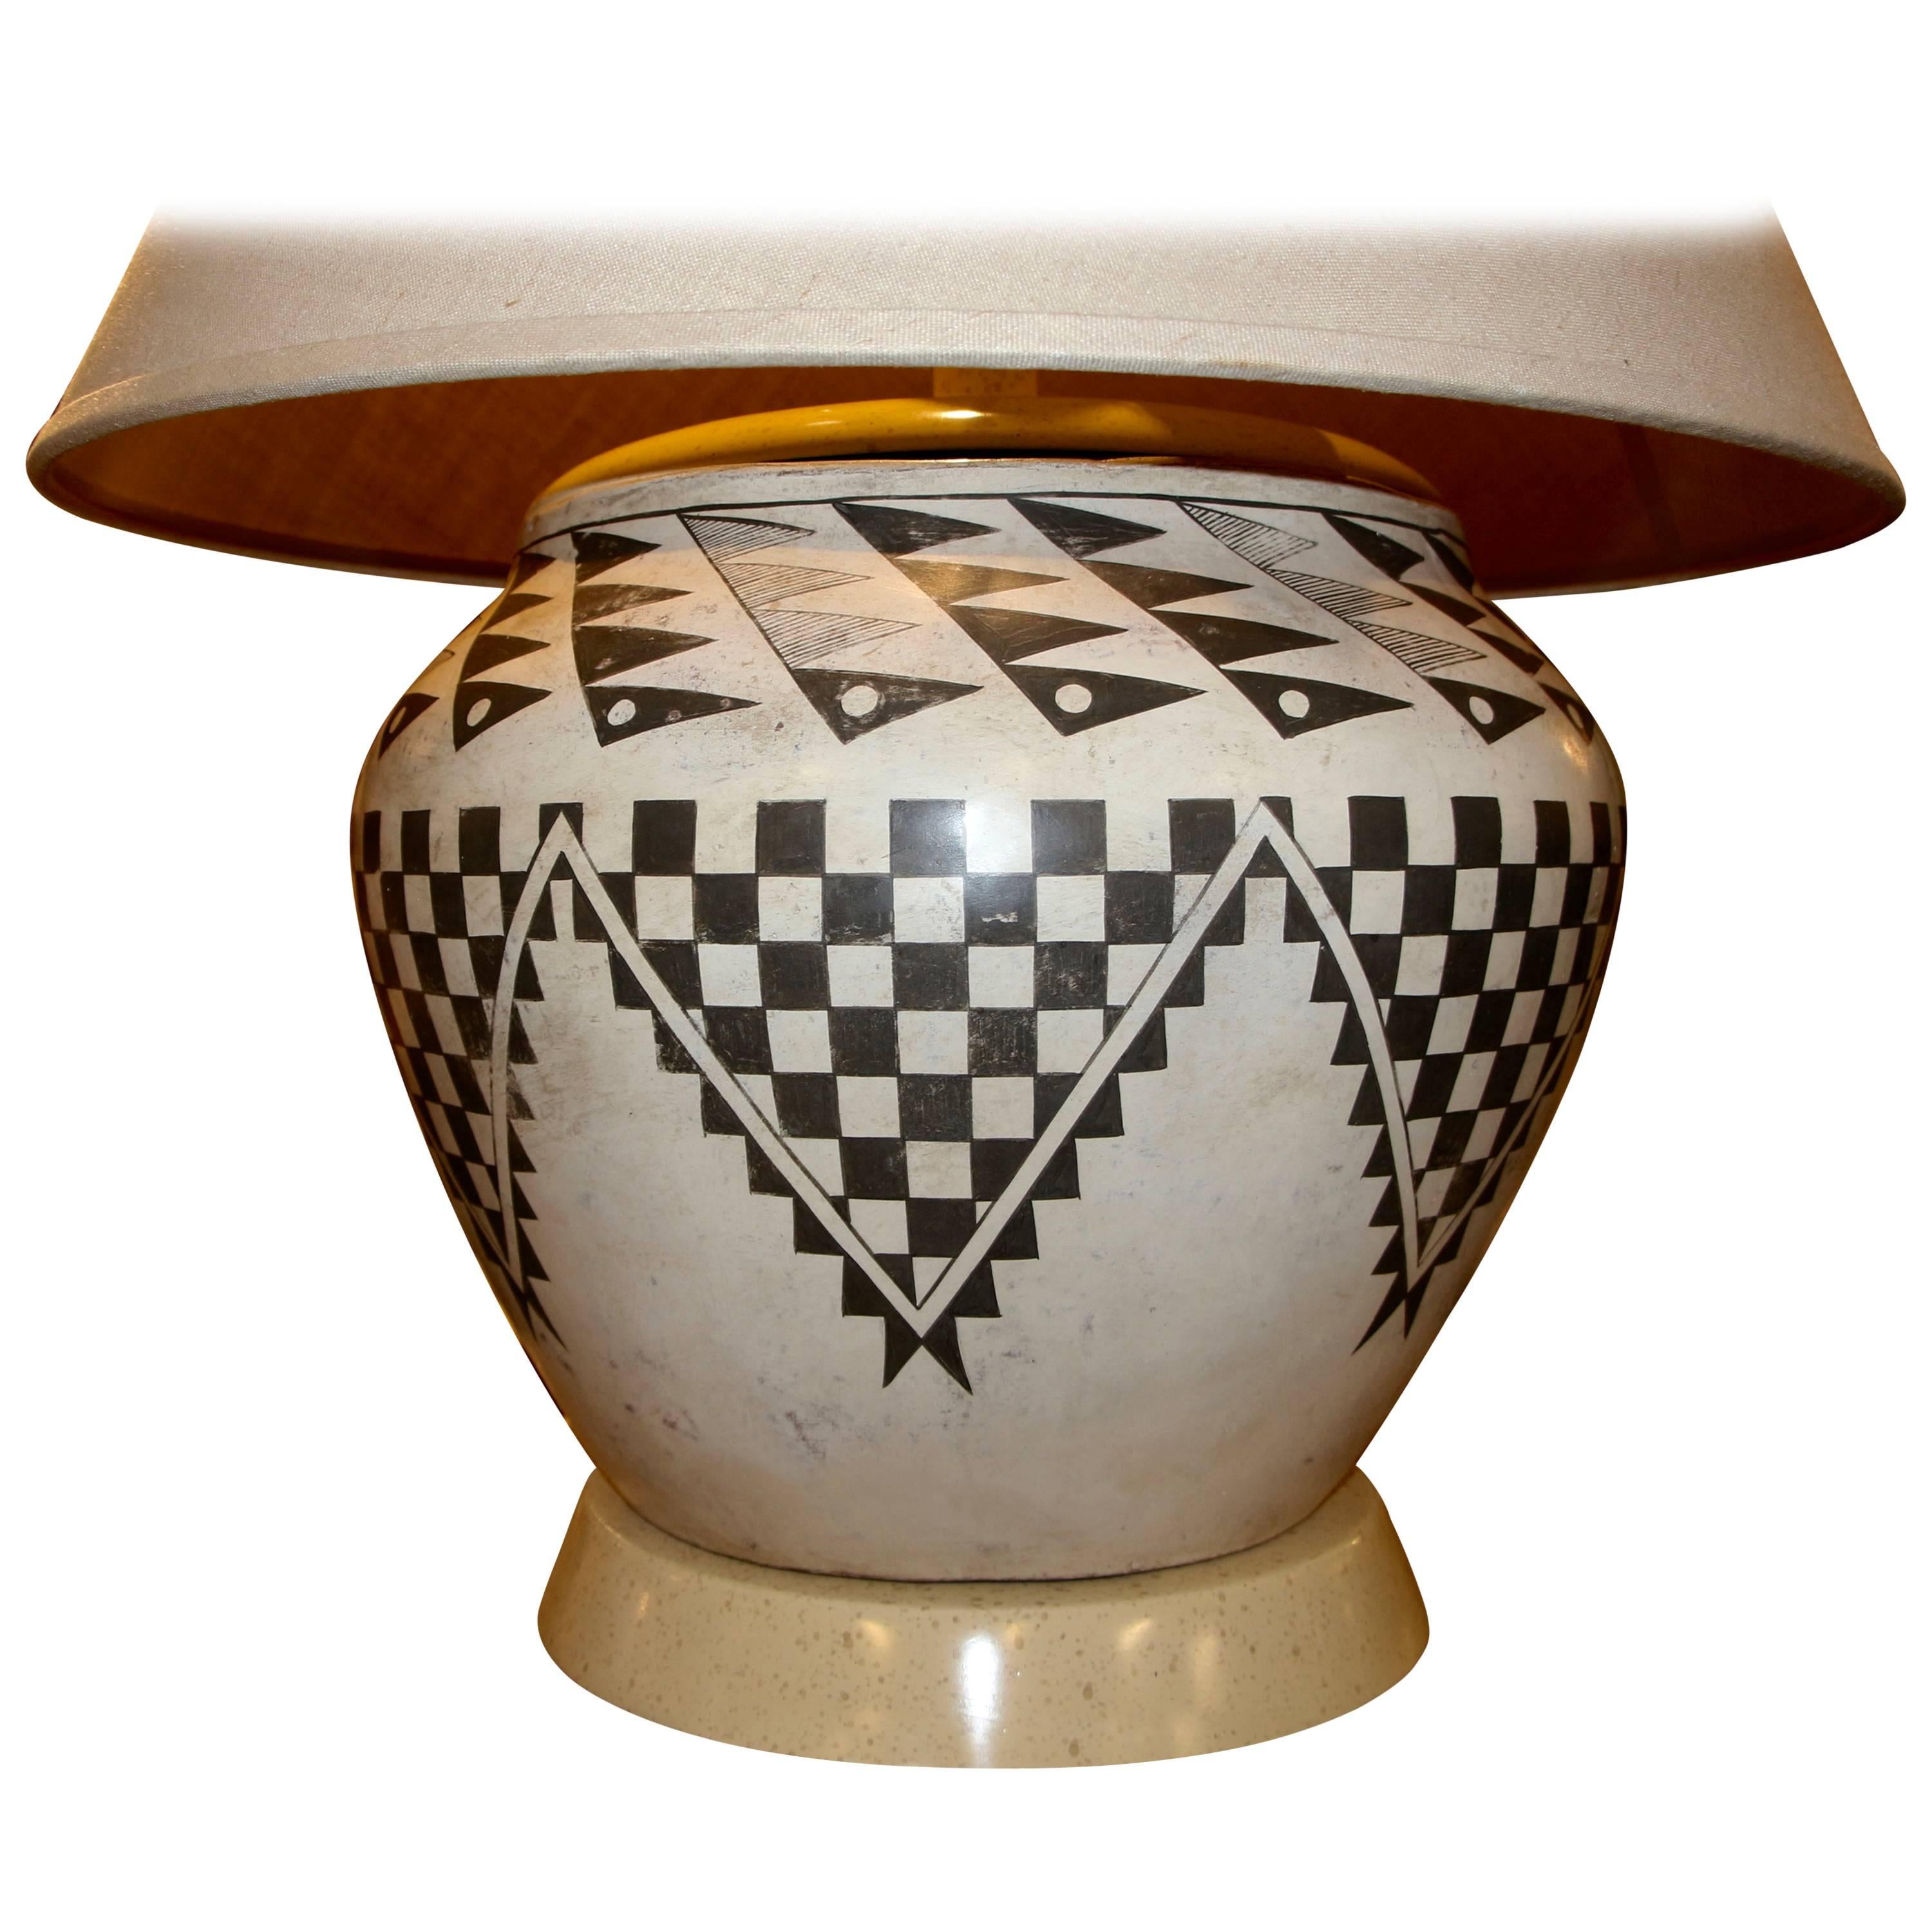 A spectacular Acoma Tularosa piece of pottery, in the style of Lucy Lewis, the renown Native American potter. As her works were signed on the base, we did not take the lamp apart to check for certain, but it most certainly looks like her work. Steve